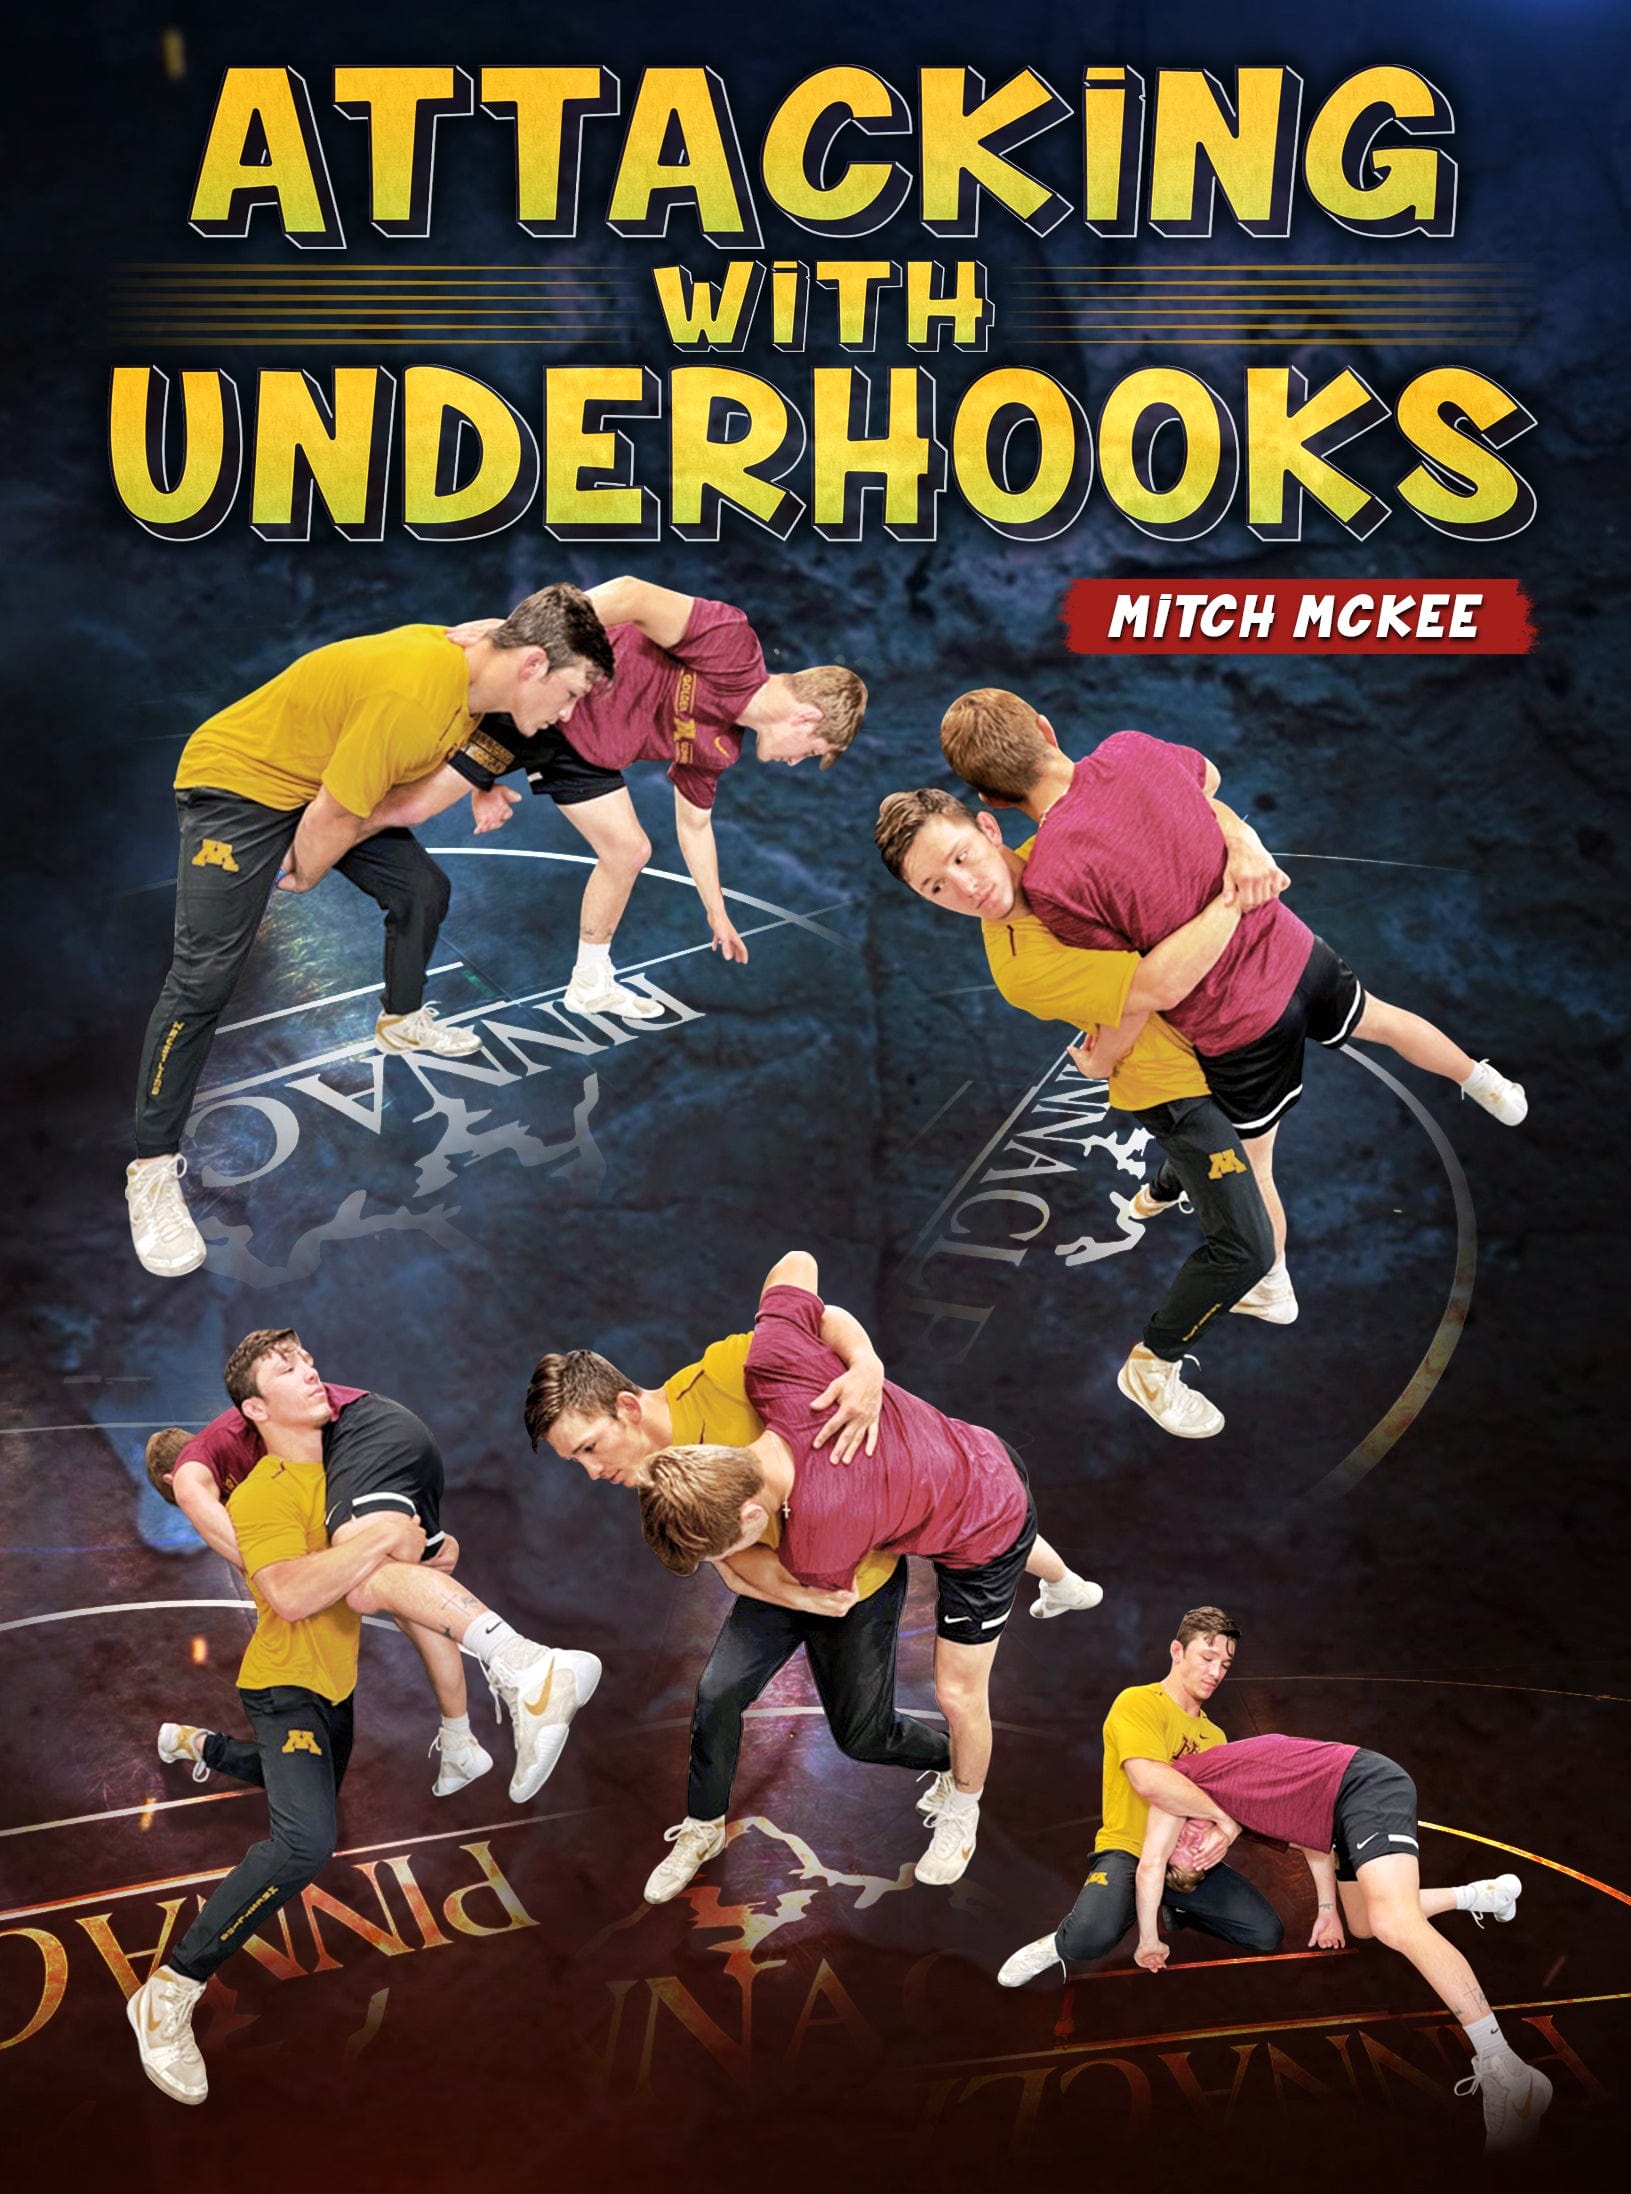 Attacking with Underhooks by Mitch McKee - Fanatic Wrestling